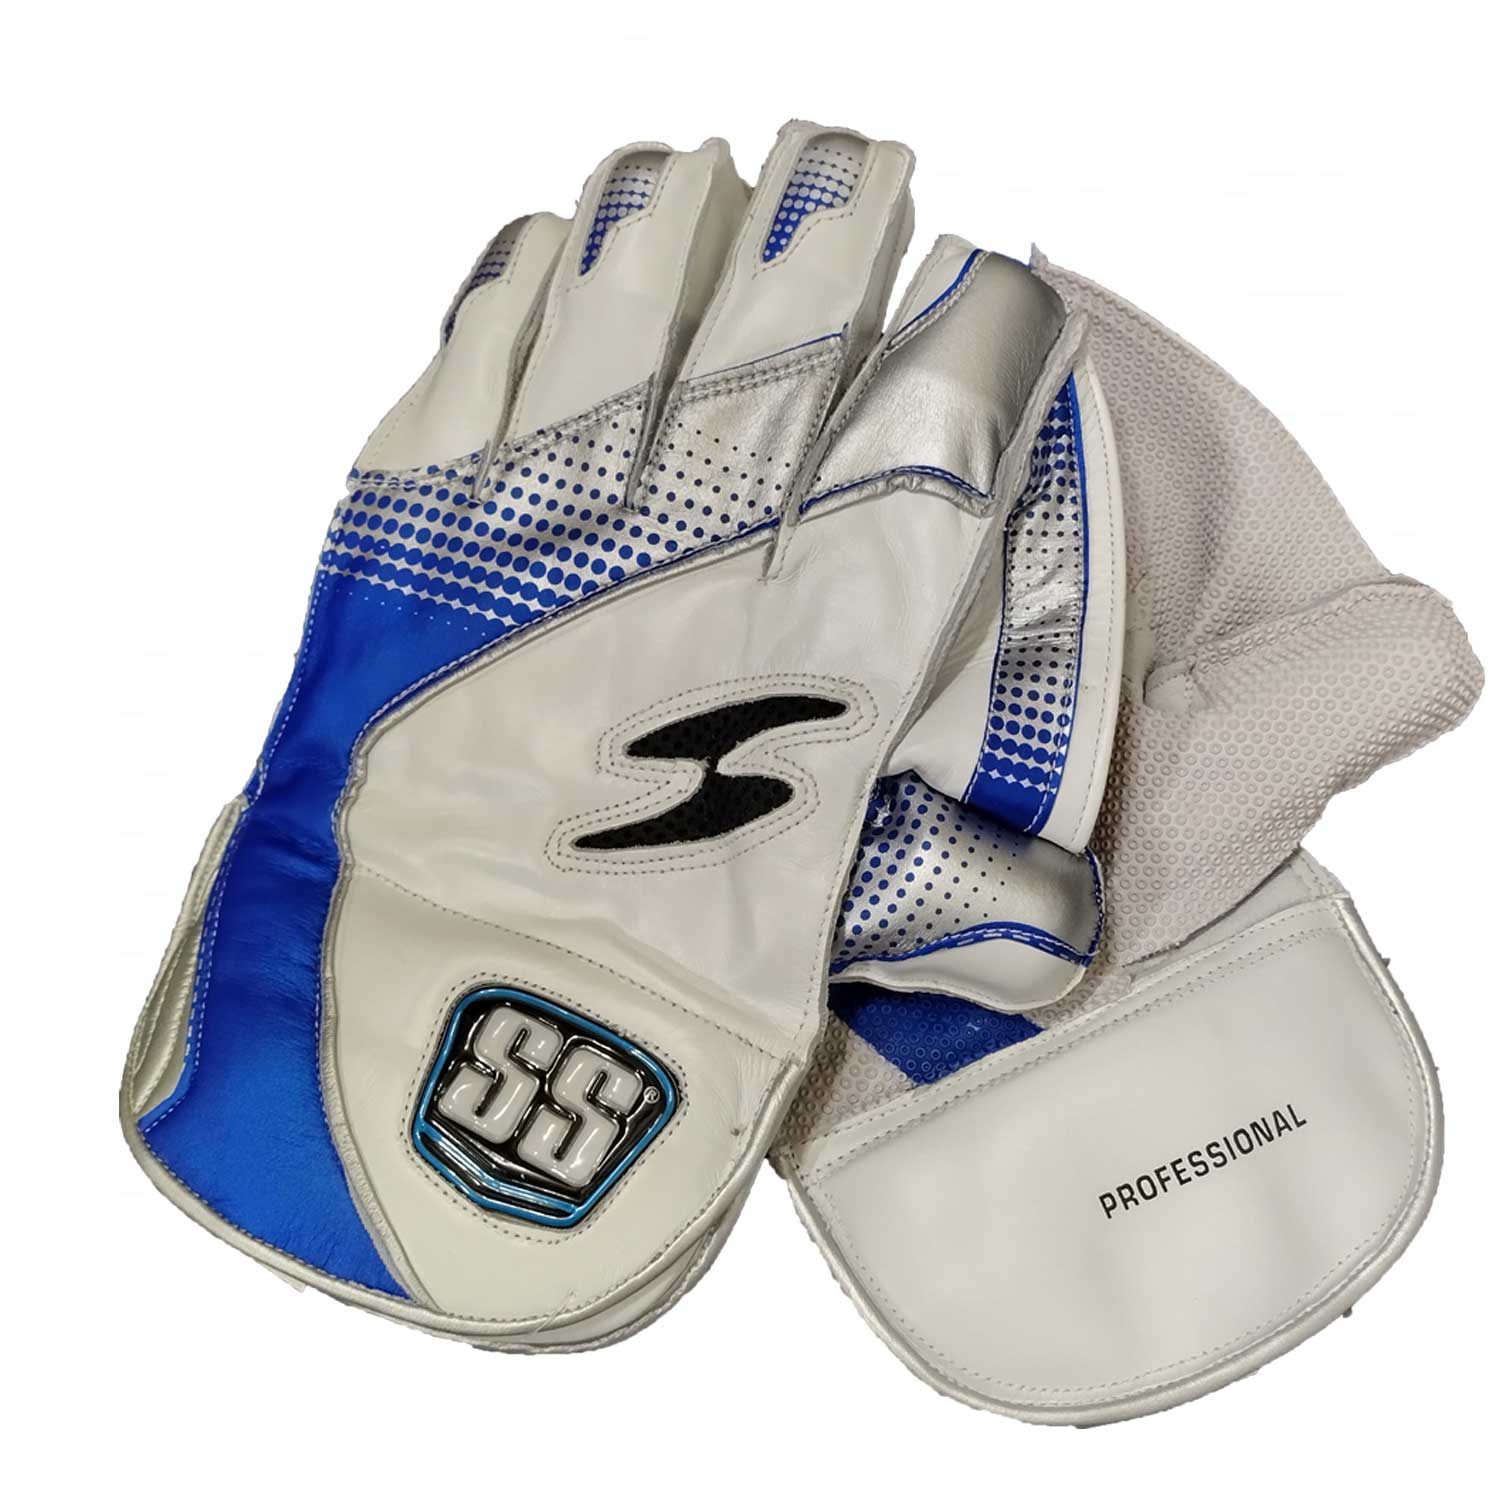 SS Professional Cricket Wicket Keeping Gloves